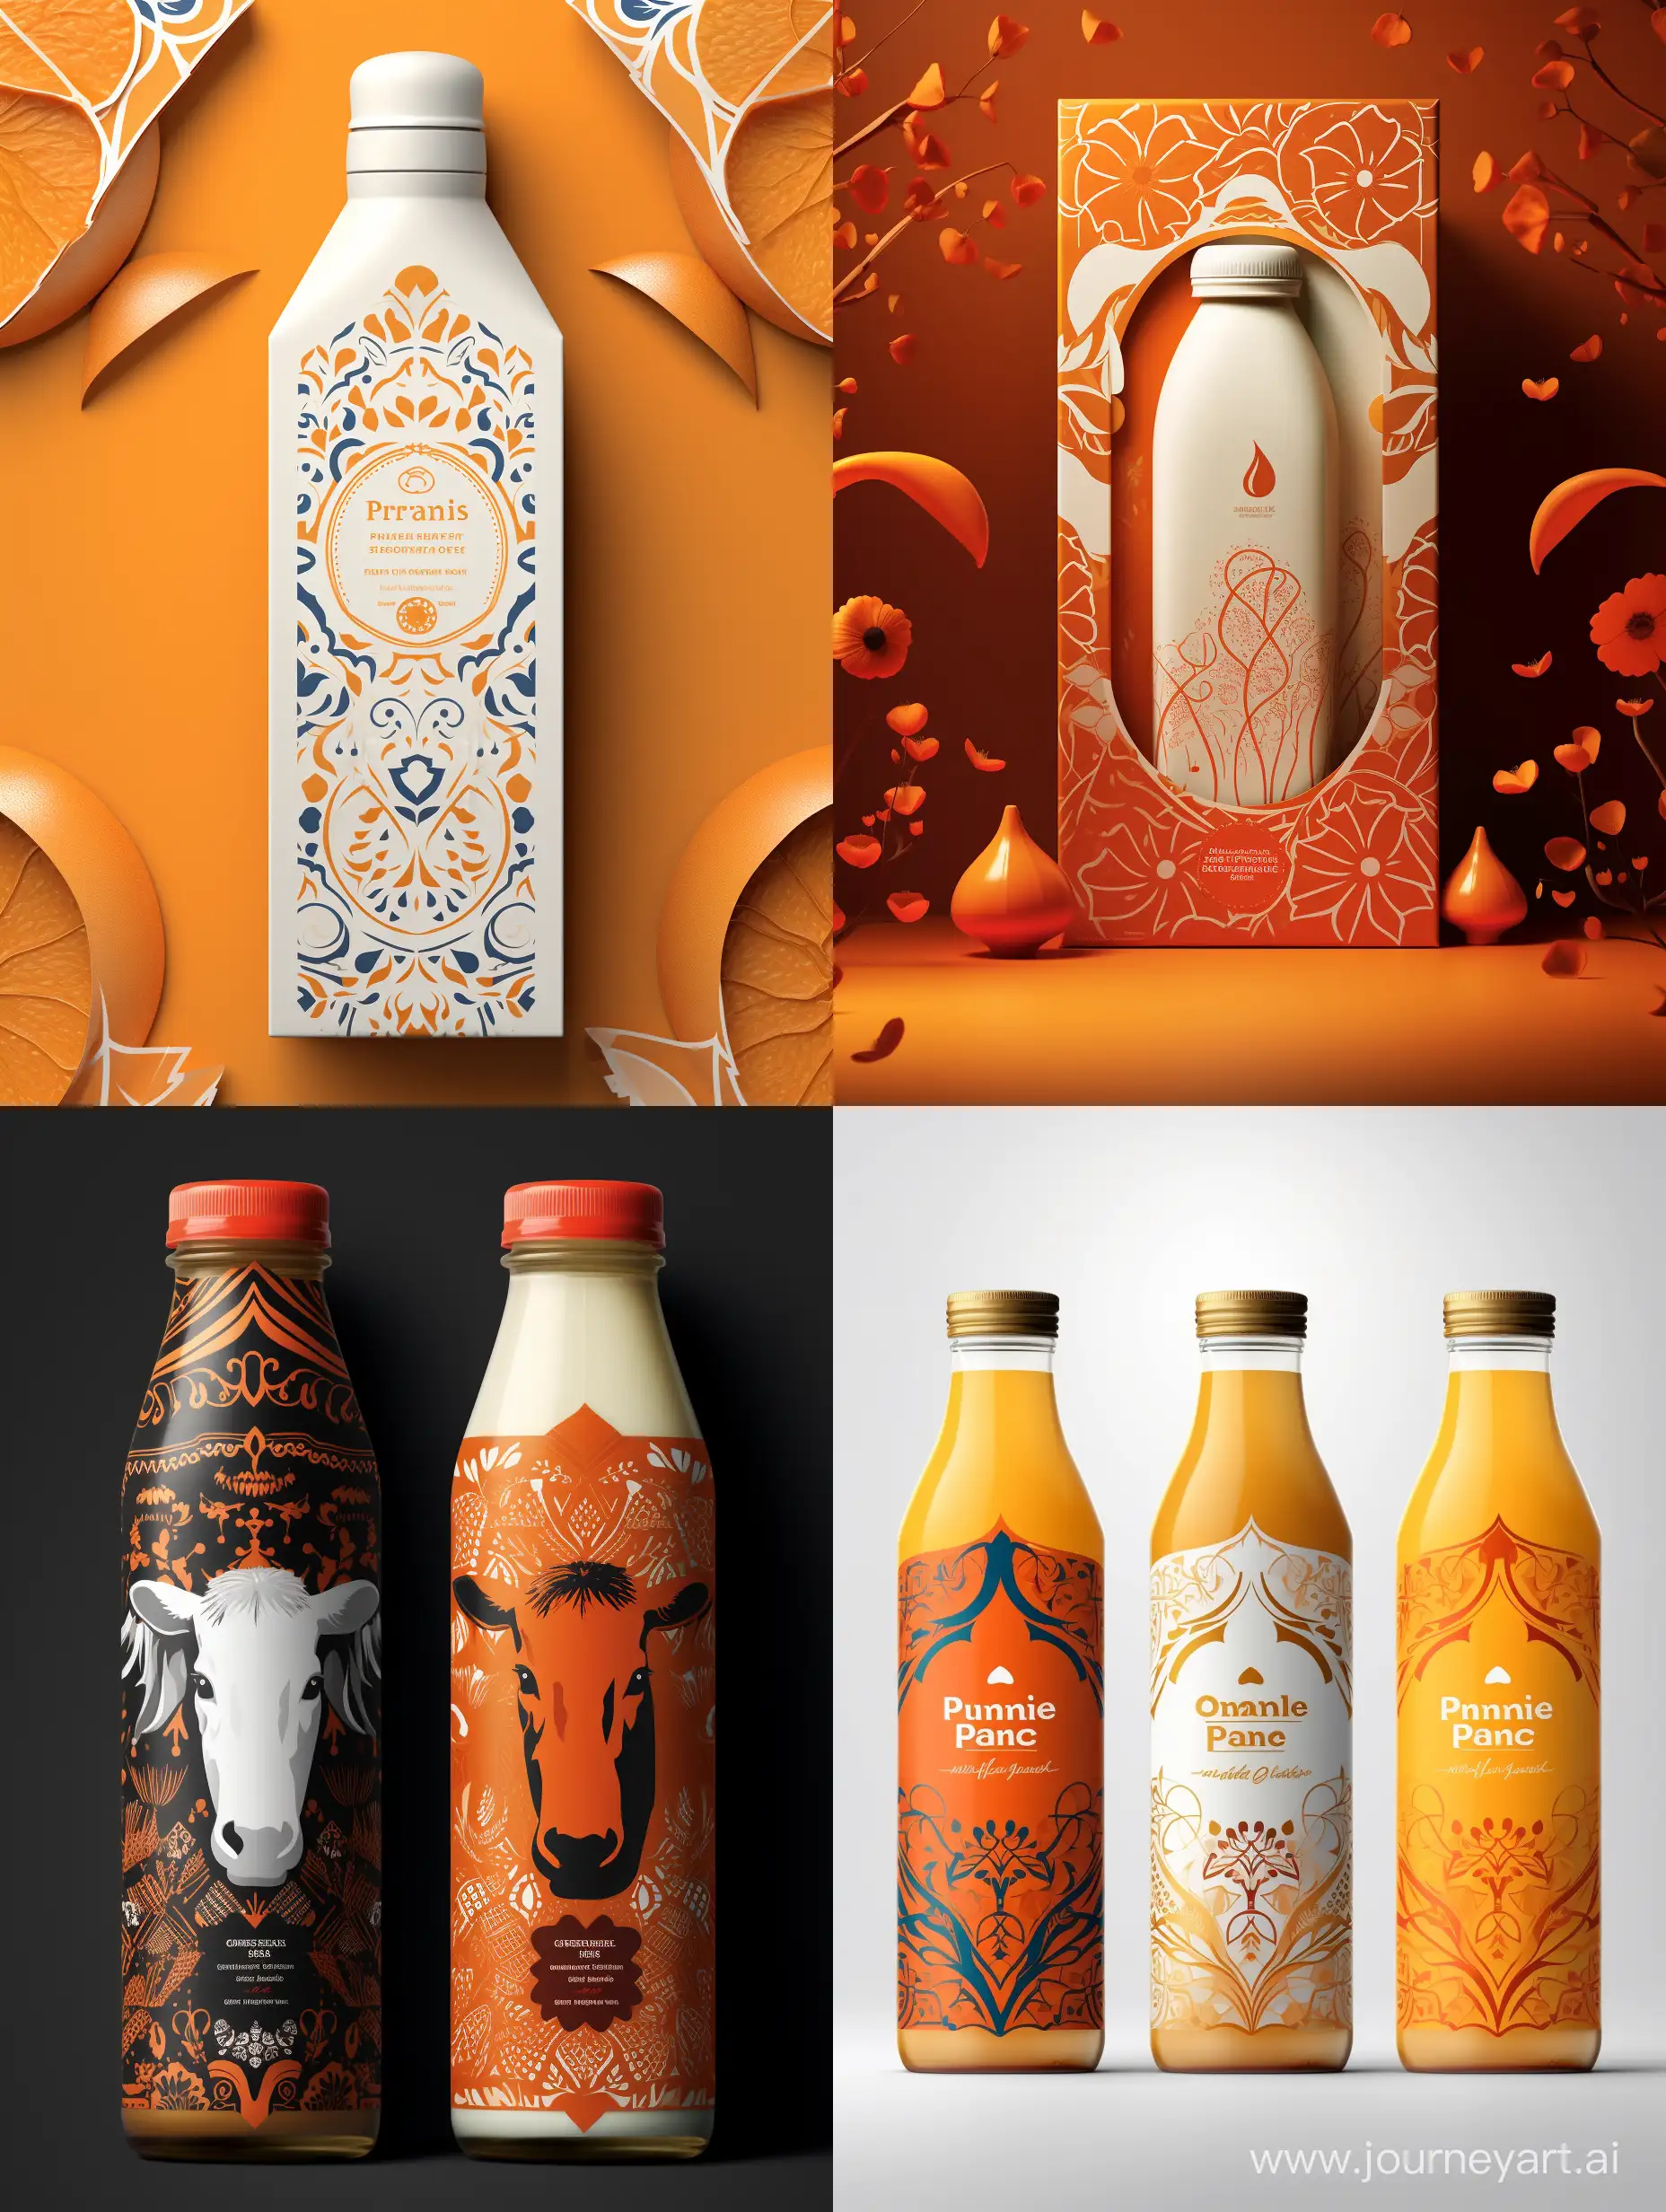 Give me the most creative packaging of orange juice in the minimal style and style of Parker Williams. use Persian design elements.